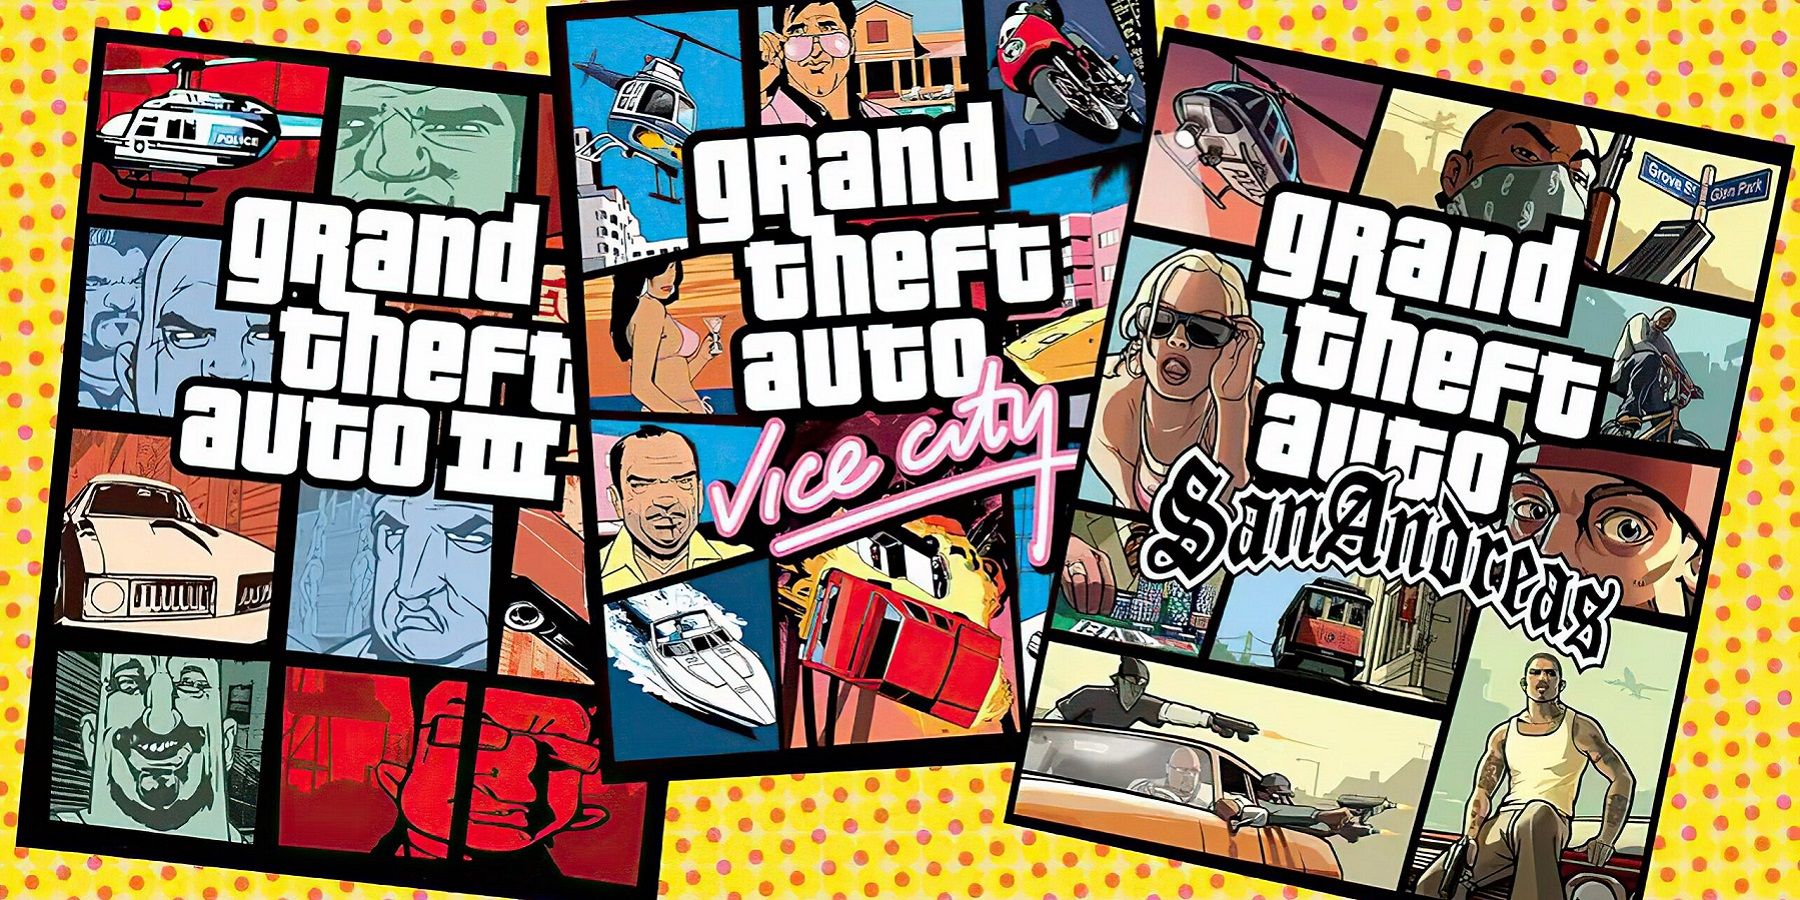 An image showing the box art for the Grand Theft Auto trilogy.